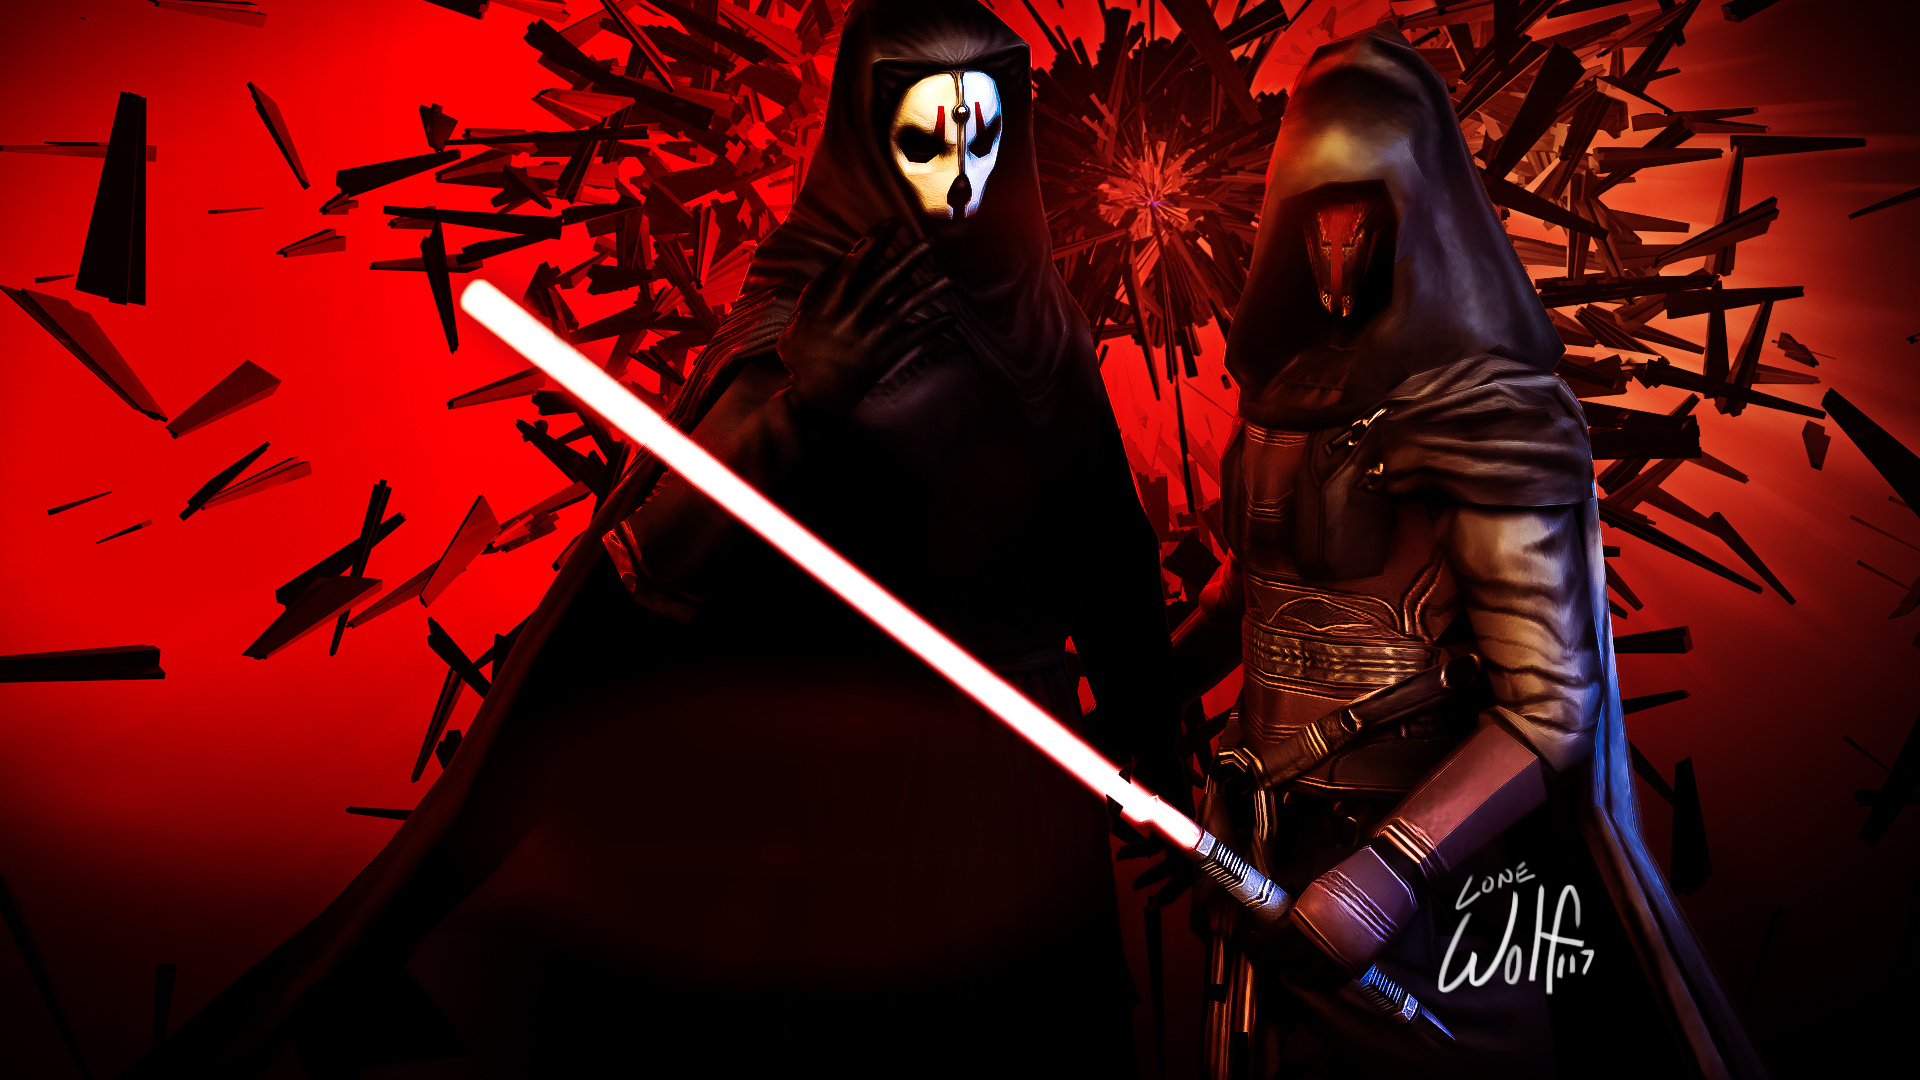 The Sith Lords by LoneWolf117 on